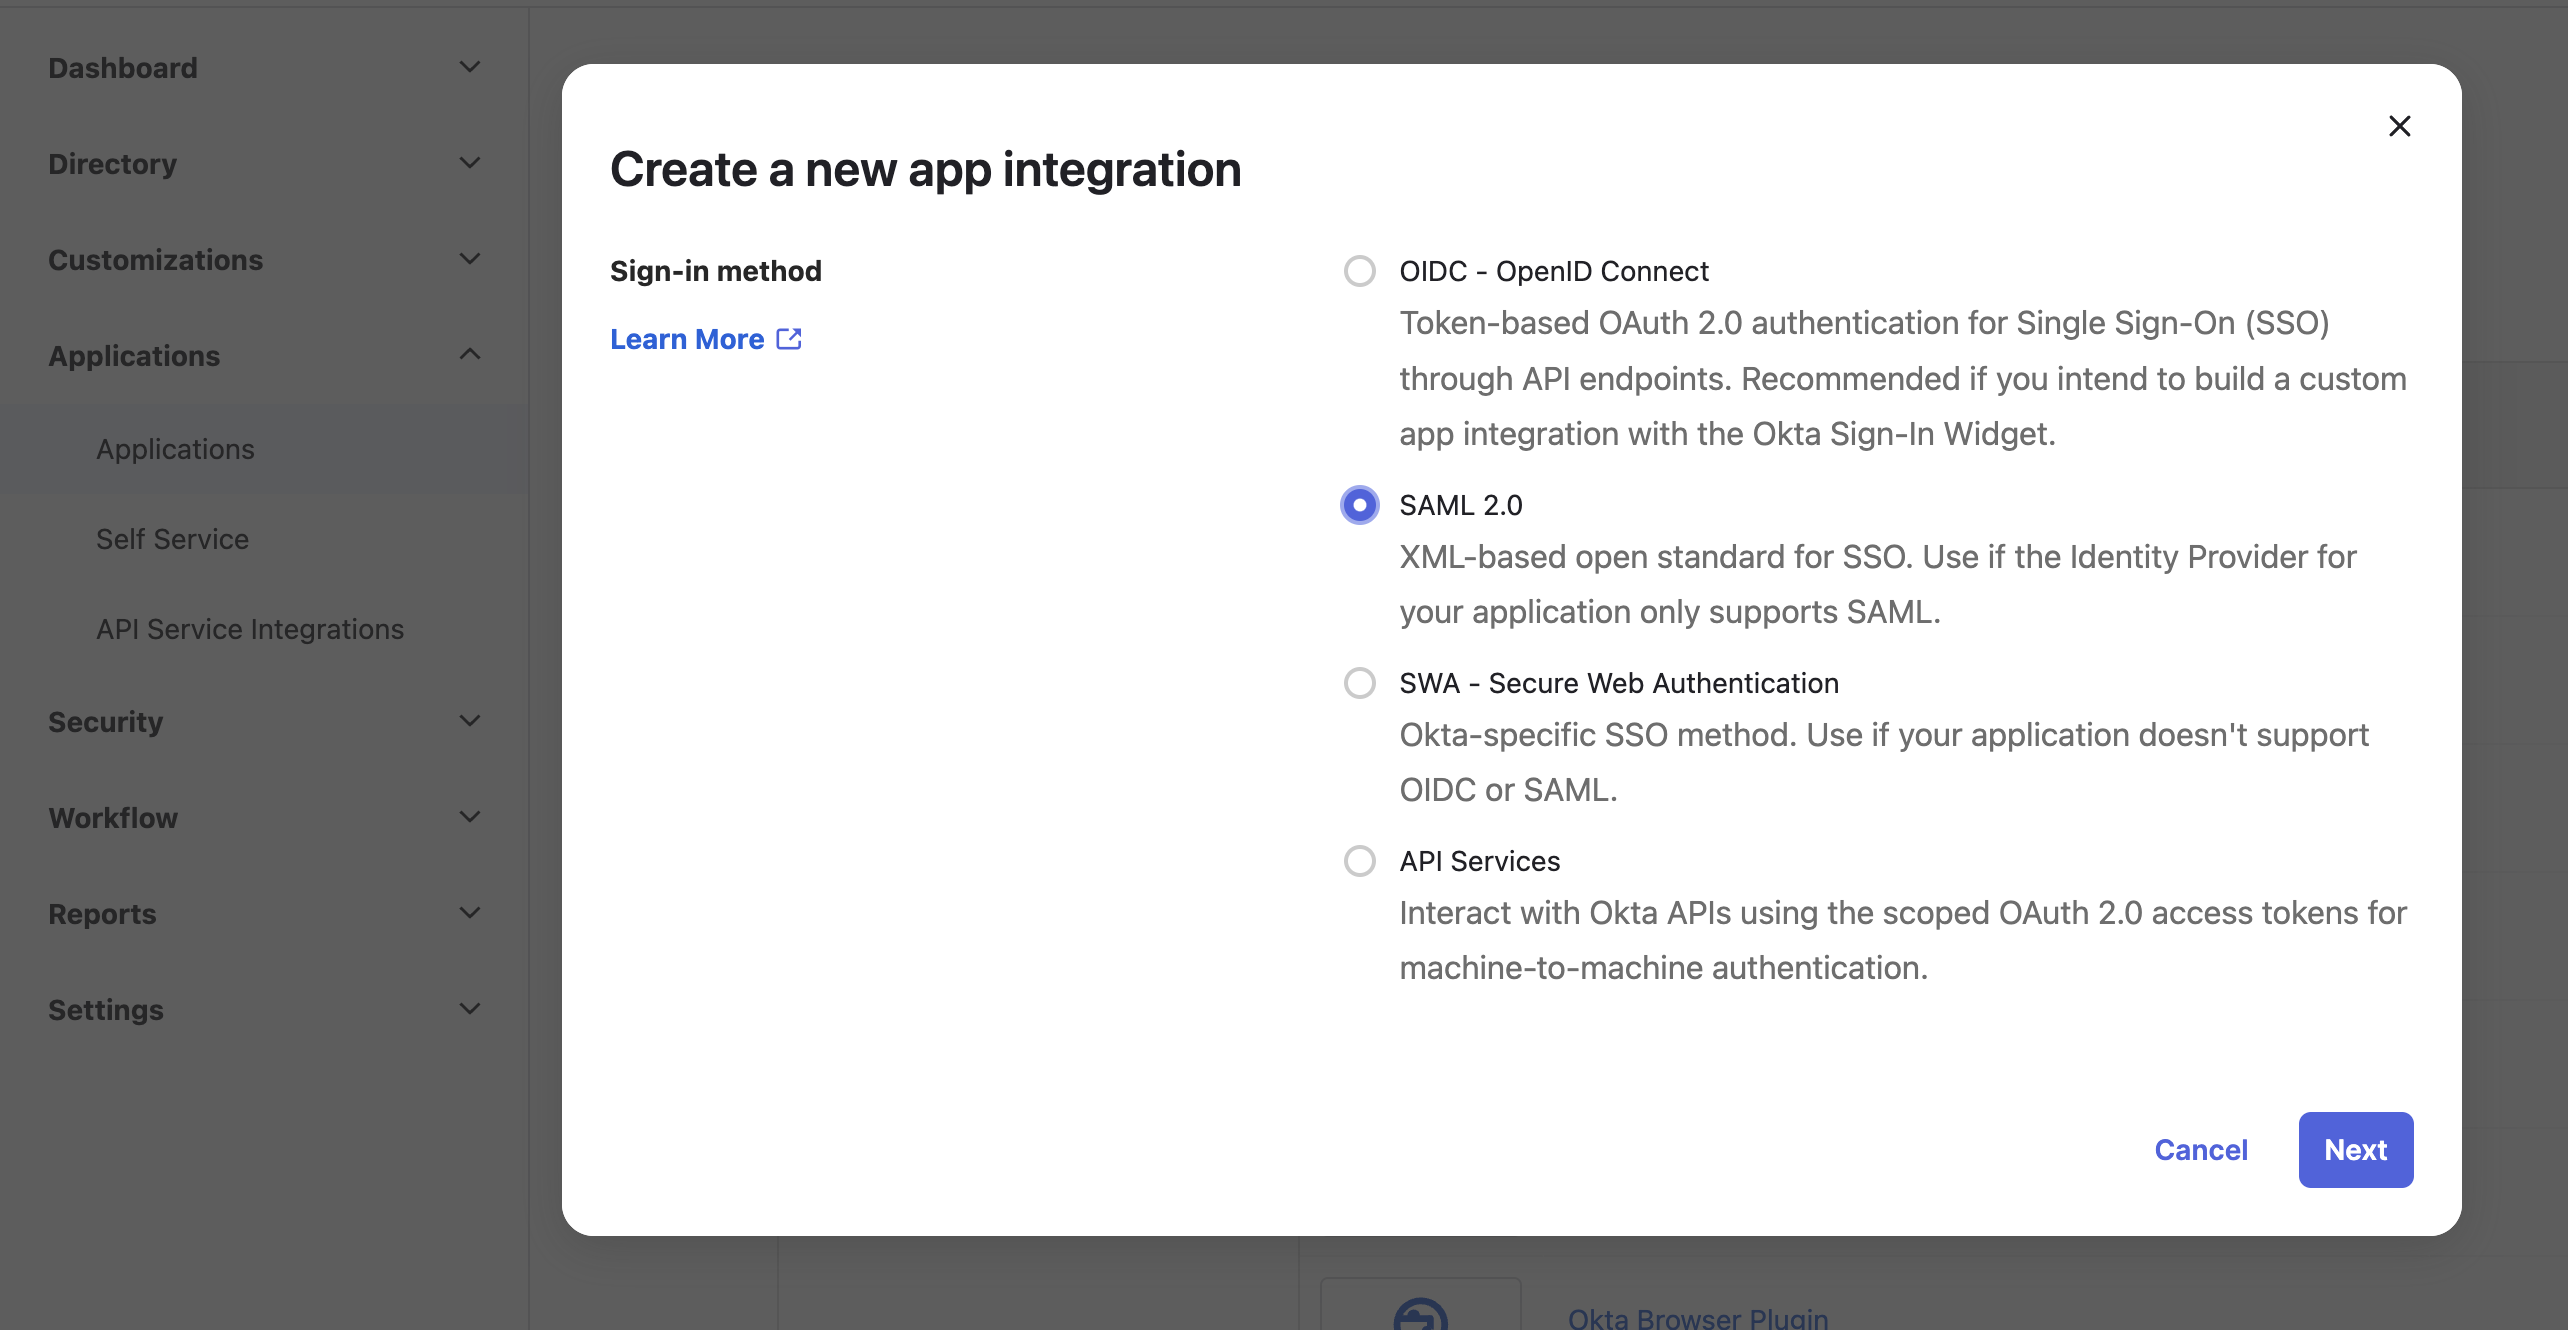 Selecting a sign-in method - SAML 2.0